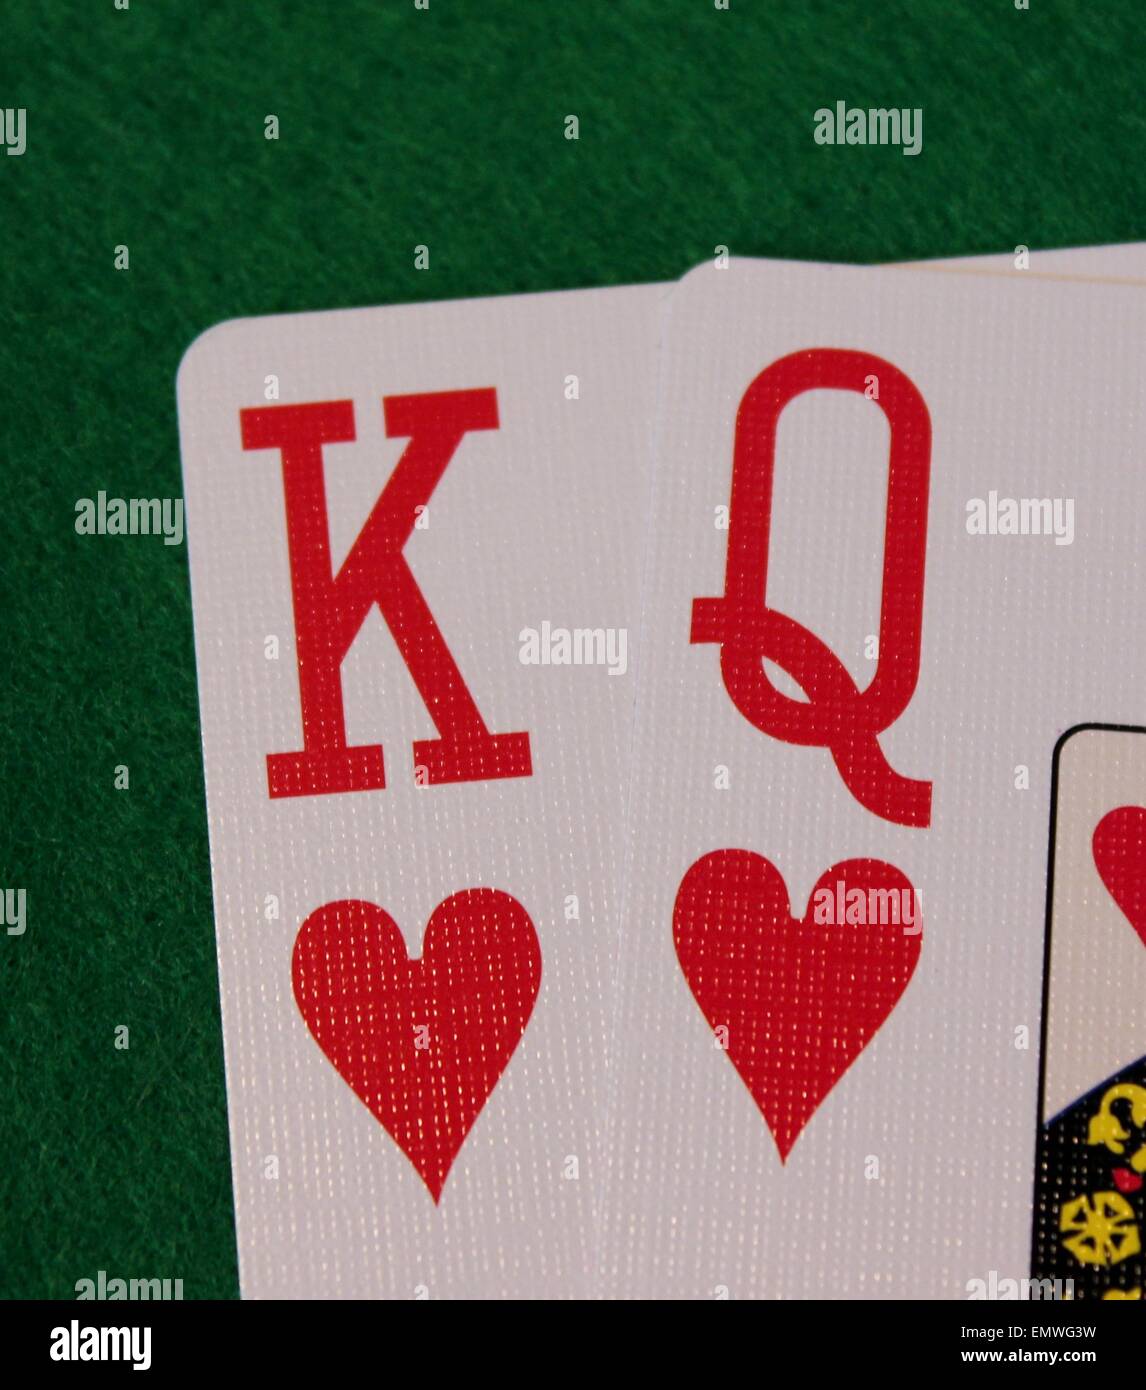 King Queen Of Hearts Texas Hold Em Starting Hand Stock Photo